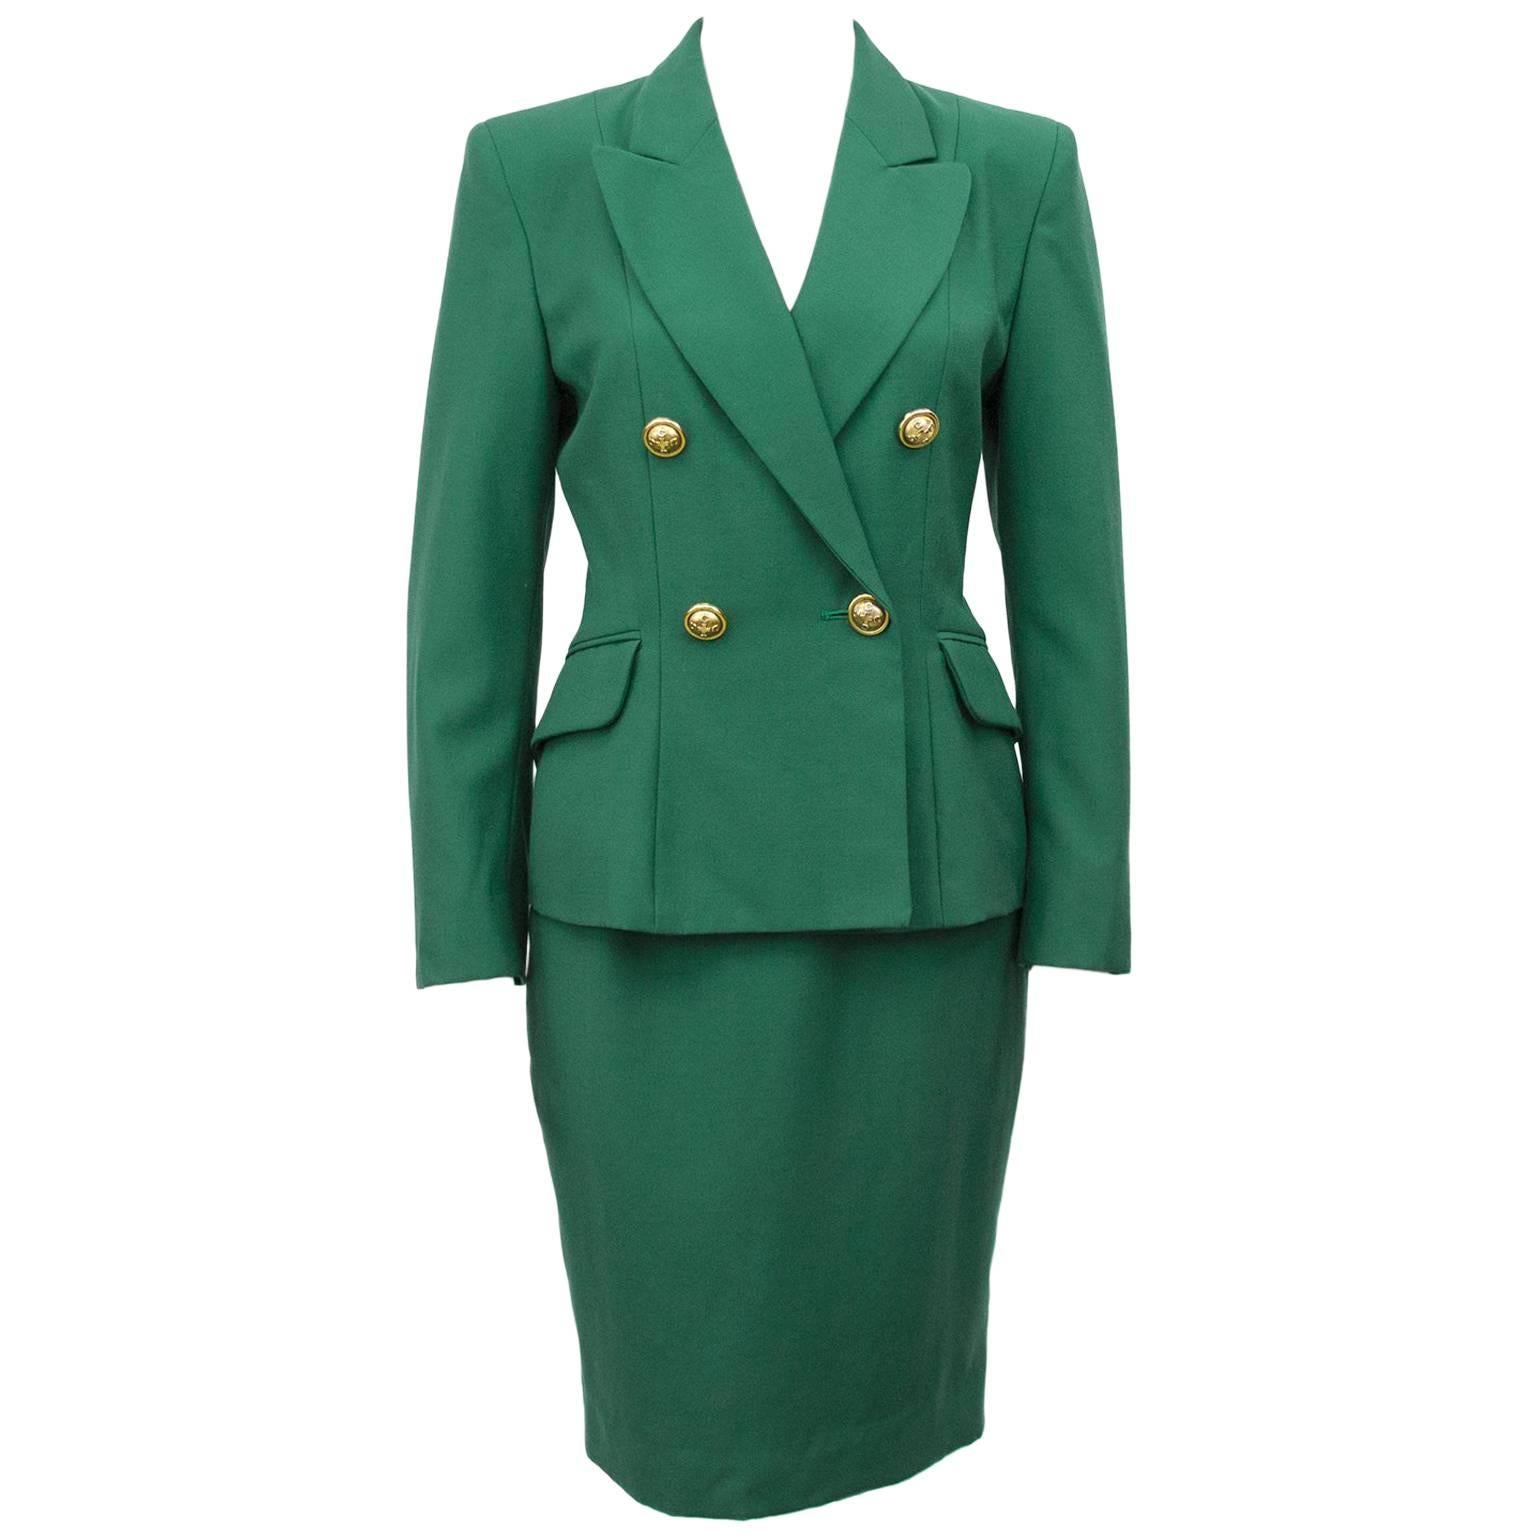 Tailleur jupe en laine vert Kelly Moschino Cheap and Chic des années 1980 